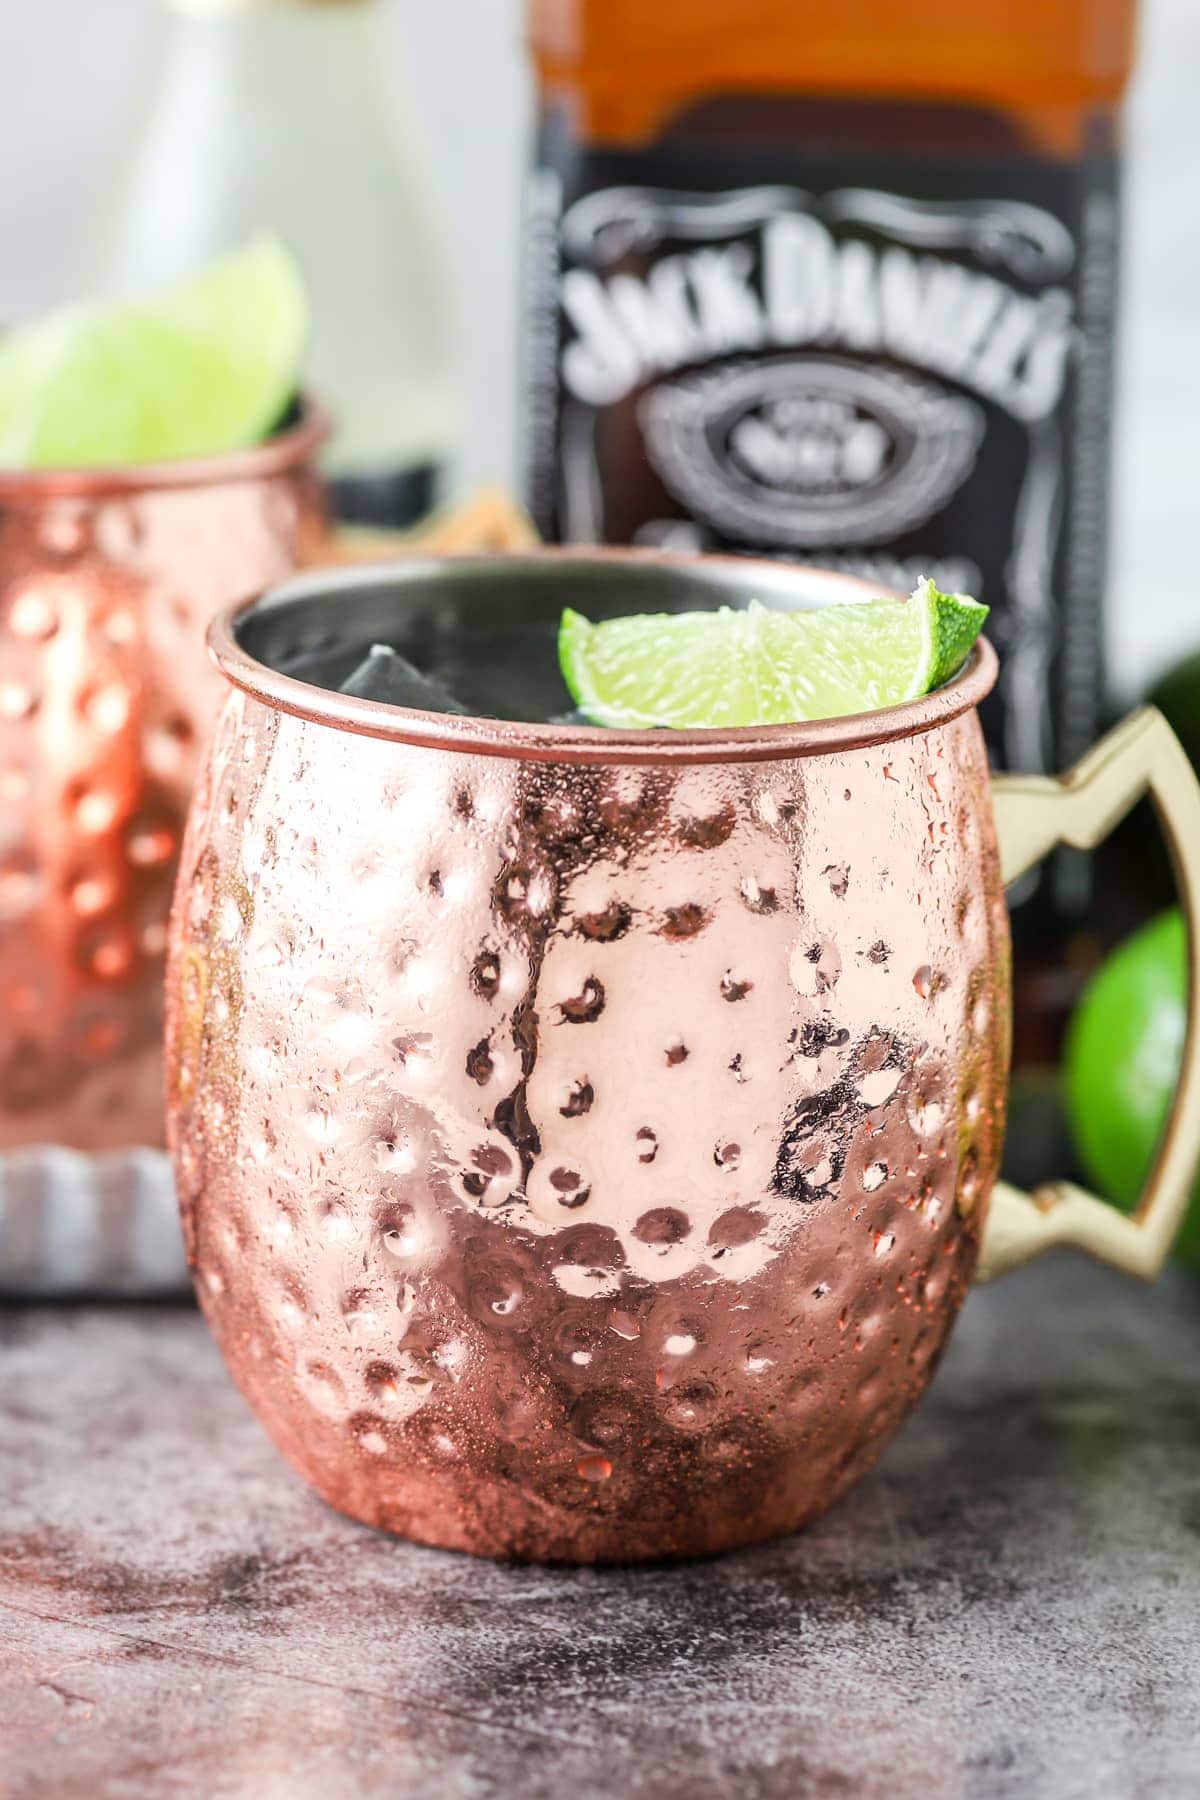 Refreshing tennesse mule with lime and ice in a classic copper mule mug and a bottle of Jack Daniels blurry in the background